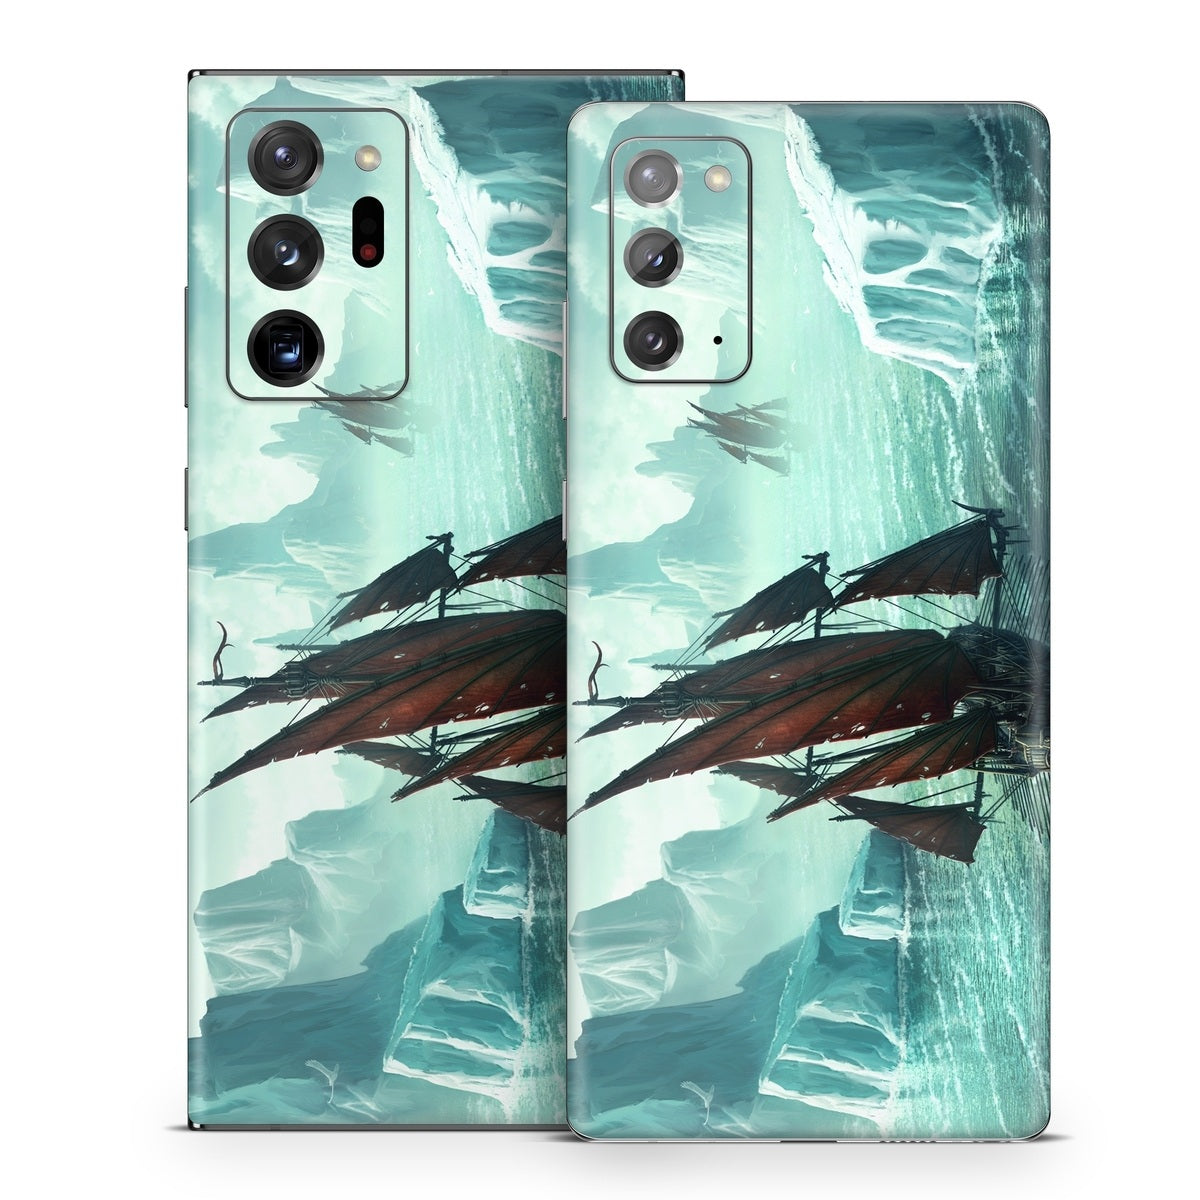 Into the Unknown - Samsung Galaxy Note 20 Skin